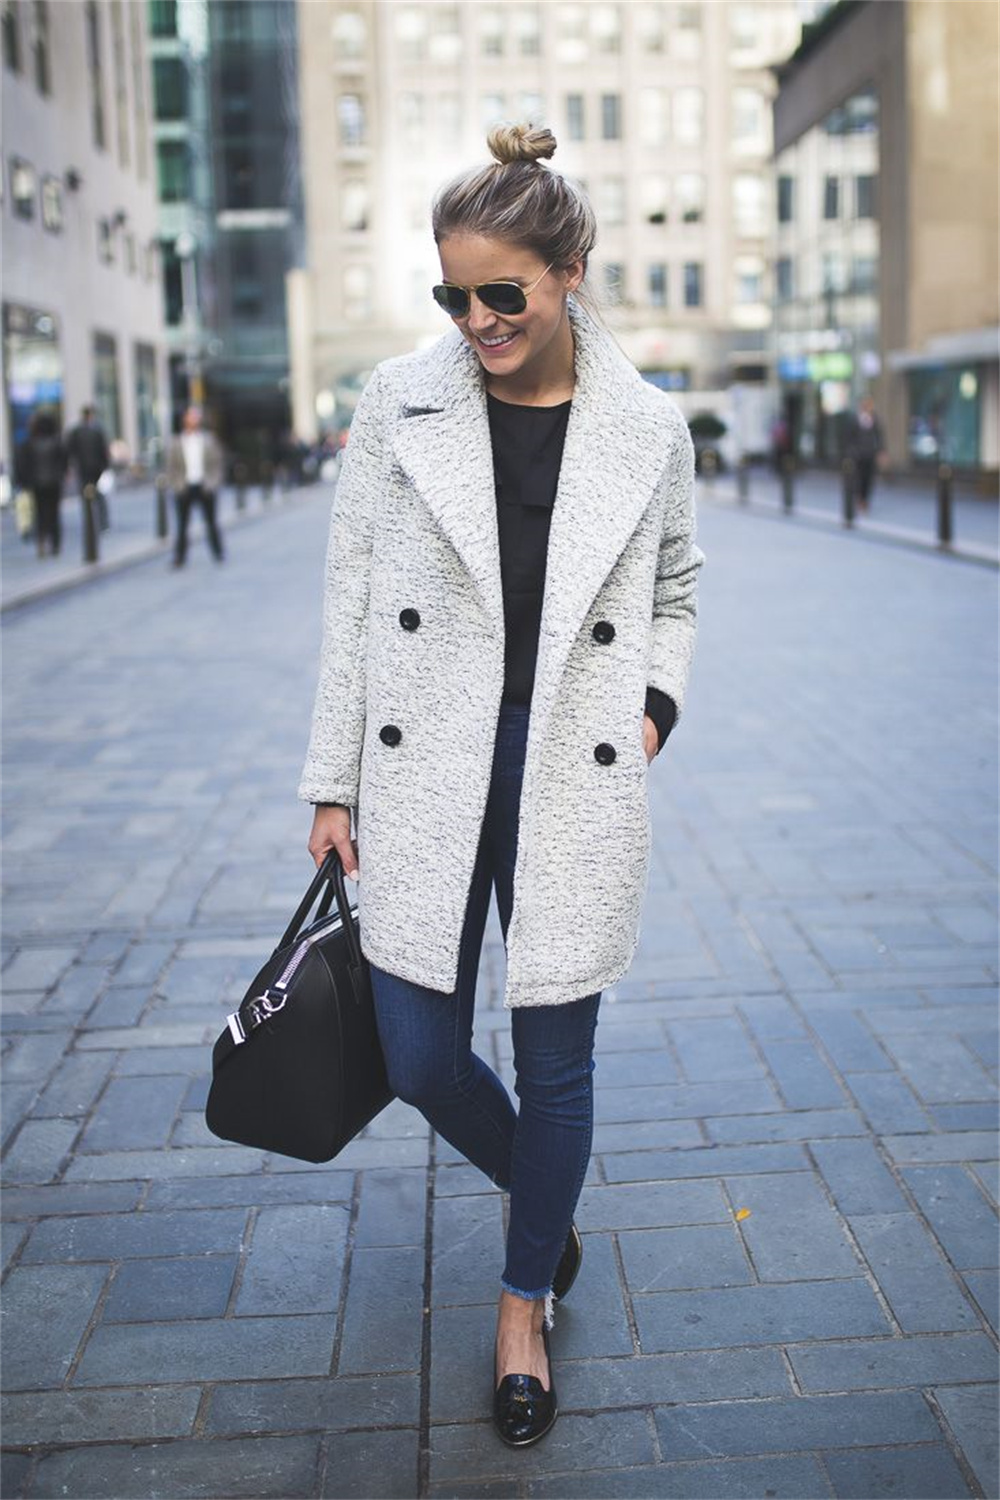 classic peacoat winter outfit